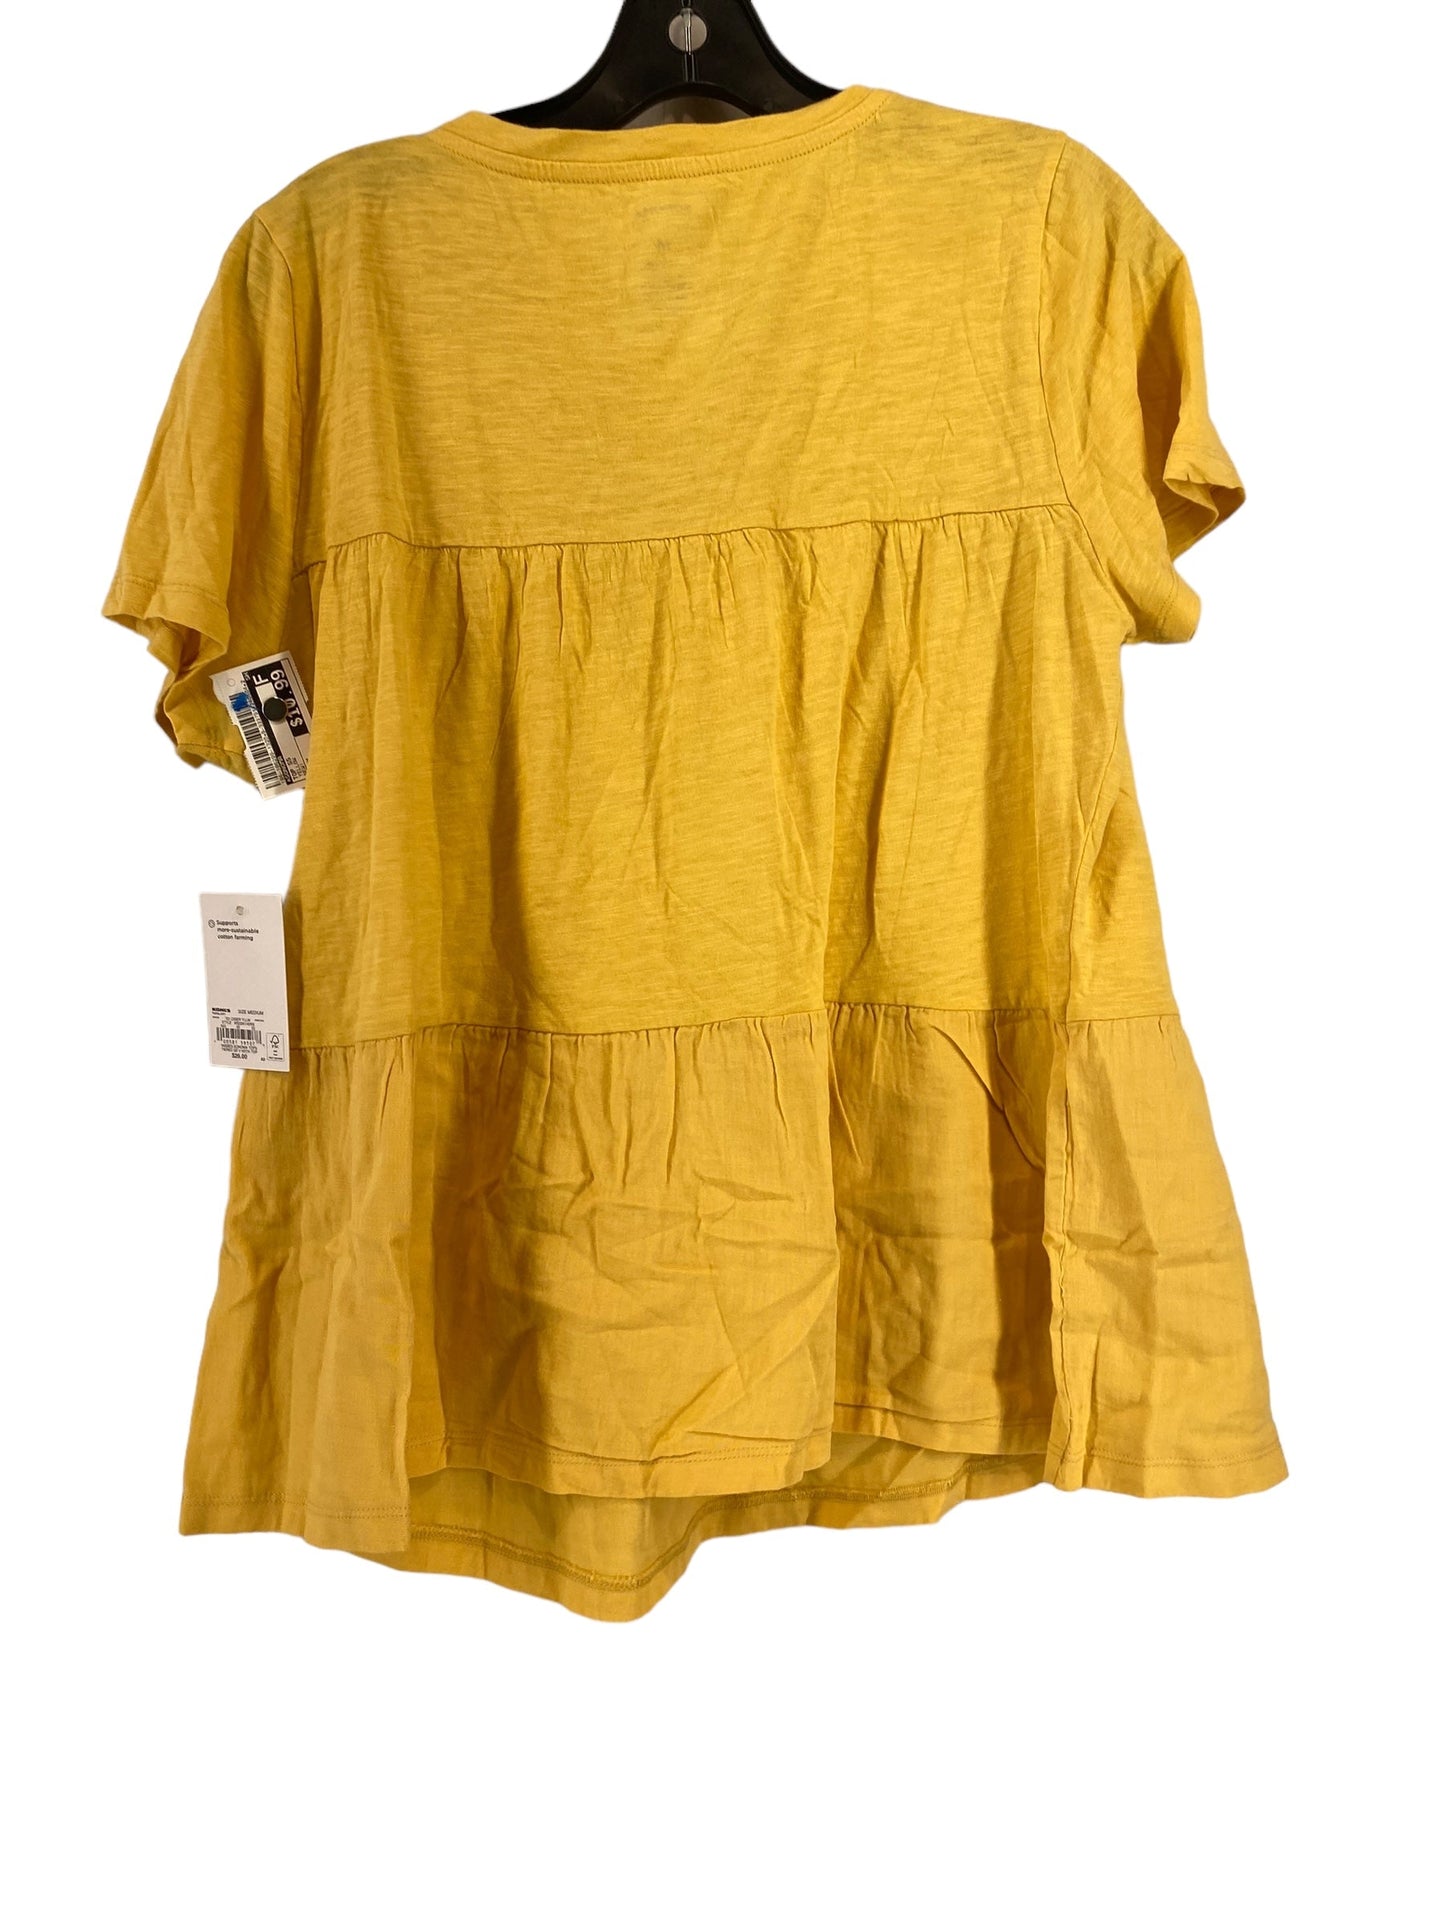 Yellow Top Short Sleeve Sonoma, Size M